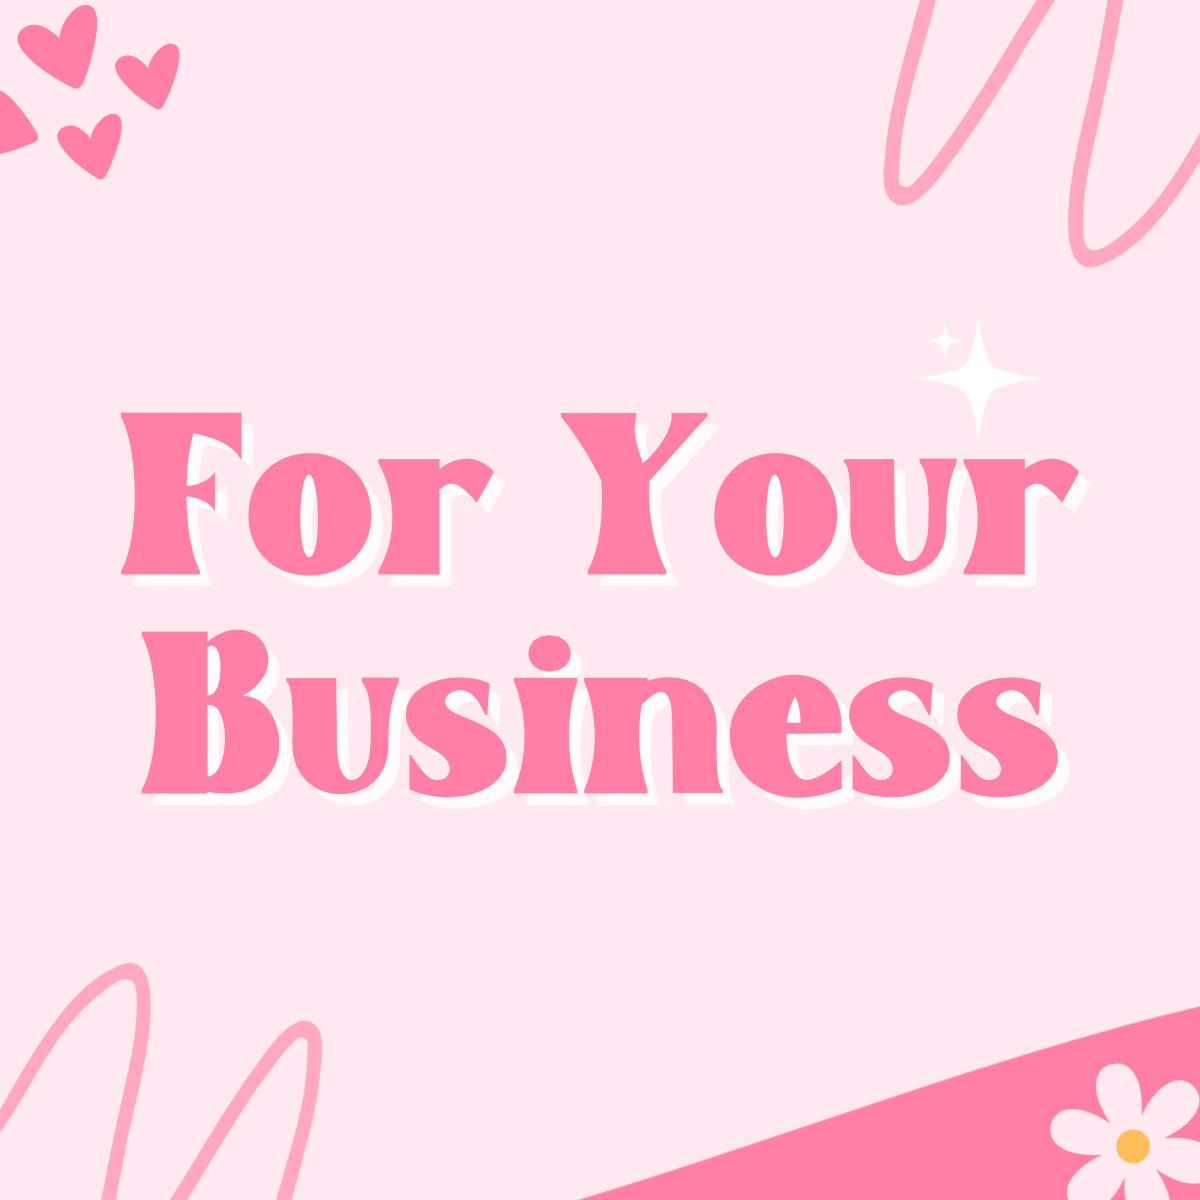 For Your Business